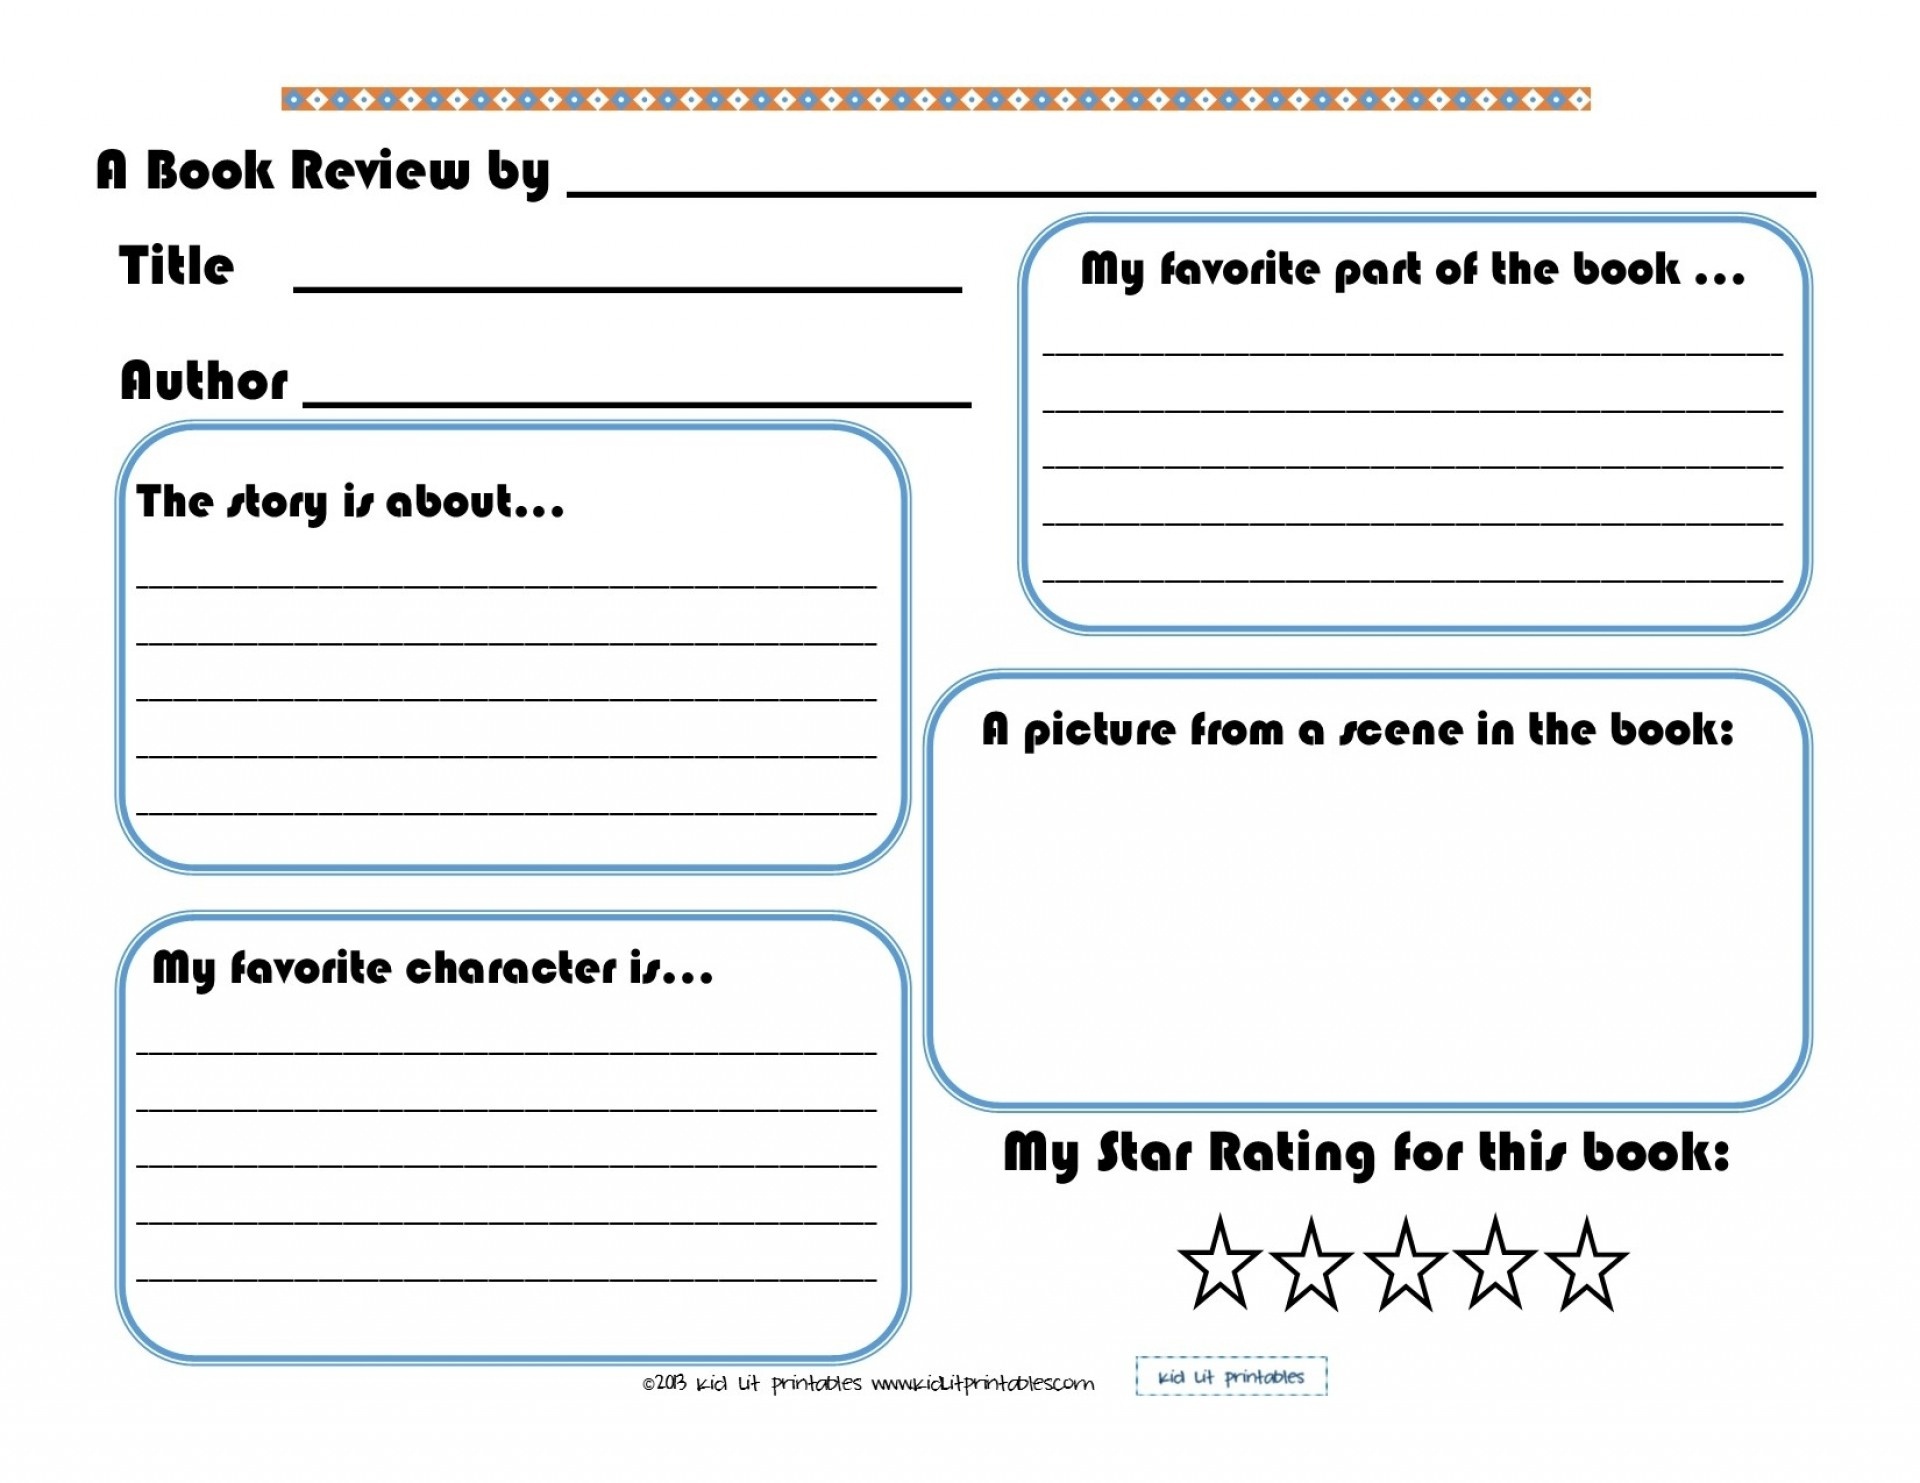 009 Best Images Of Printable Elementary Book Report Forms Pertaining - Free Printable Book Report Forms For Elementary Students